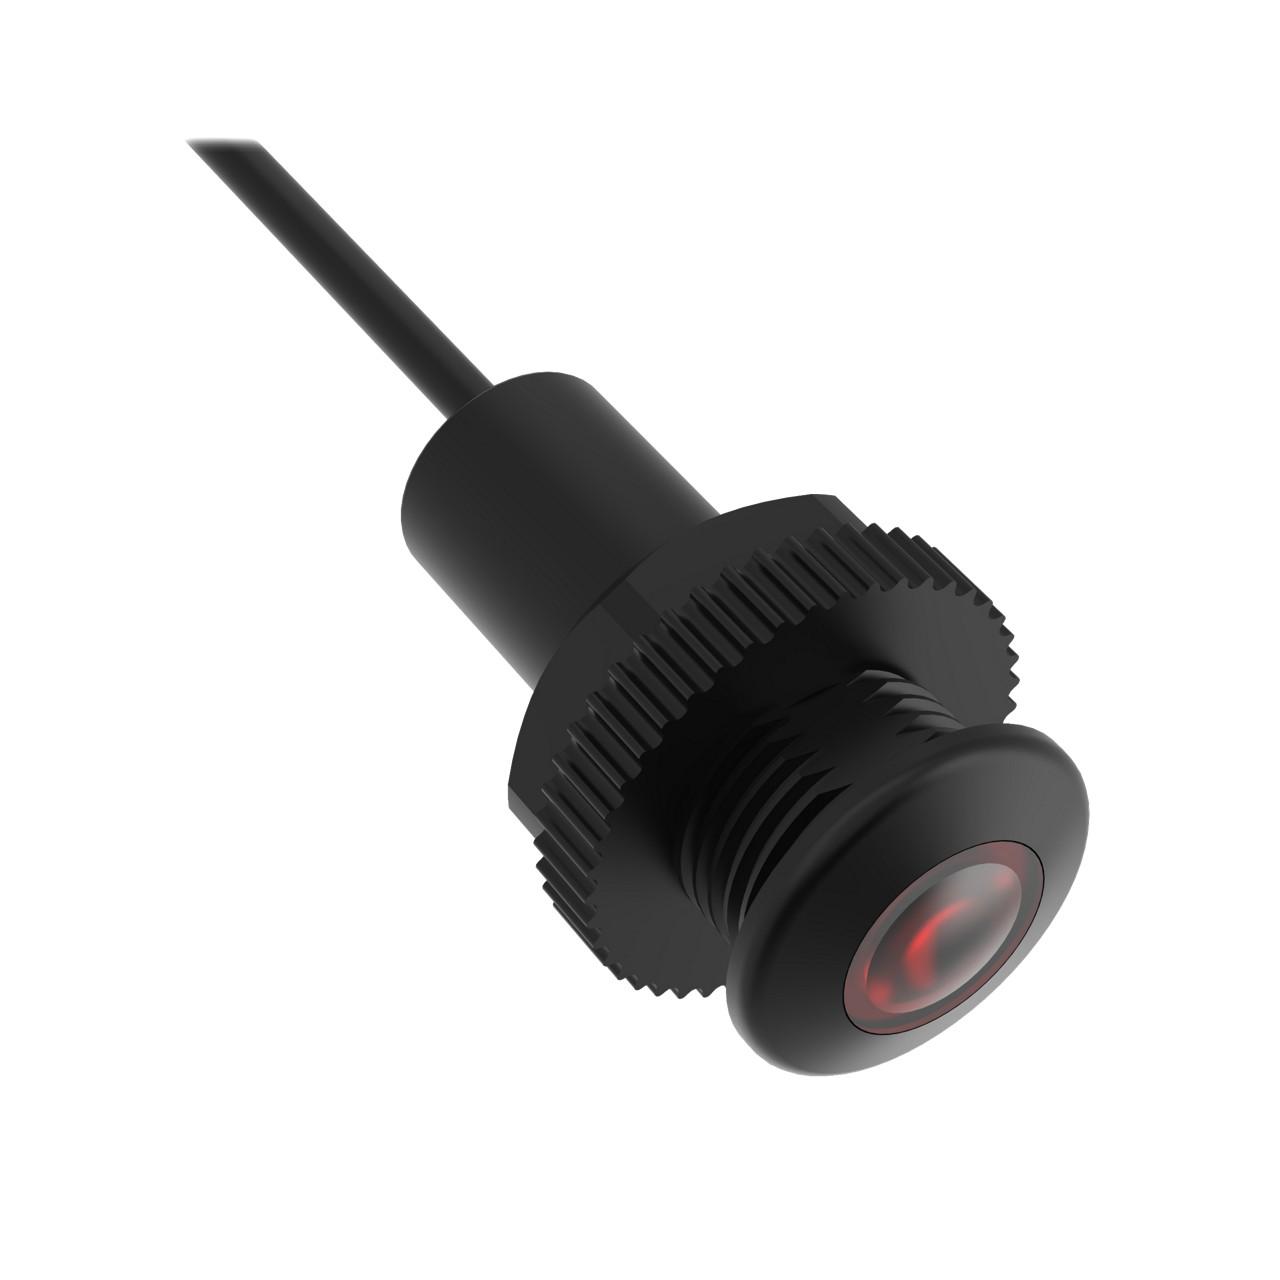 Banner SB12TE1 Photo-electric emitter with through-beam system / opposed mode - Banner Engineering (SB12 series) - Part #11138 - 12mm diameter - Infrared (IR) light - Supply voltage 10Vdc-30Vdc (12Vdc / 24Vdc nom.) - Pre-wired with 6.5ft / 2m cable terminated with bare 